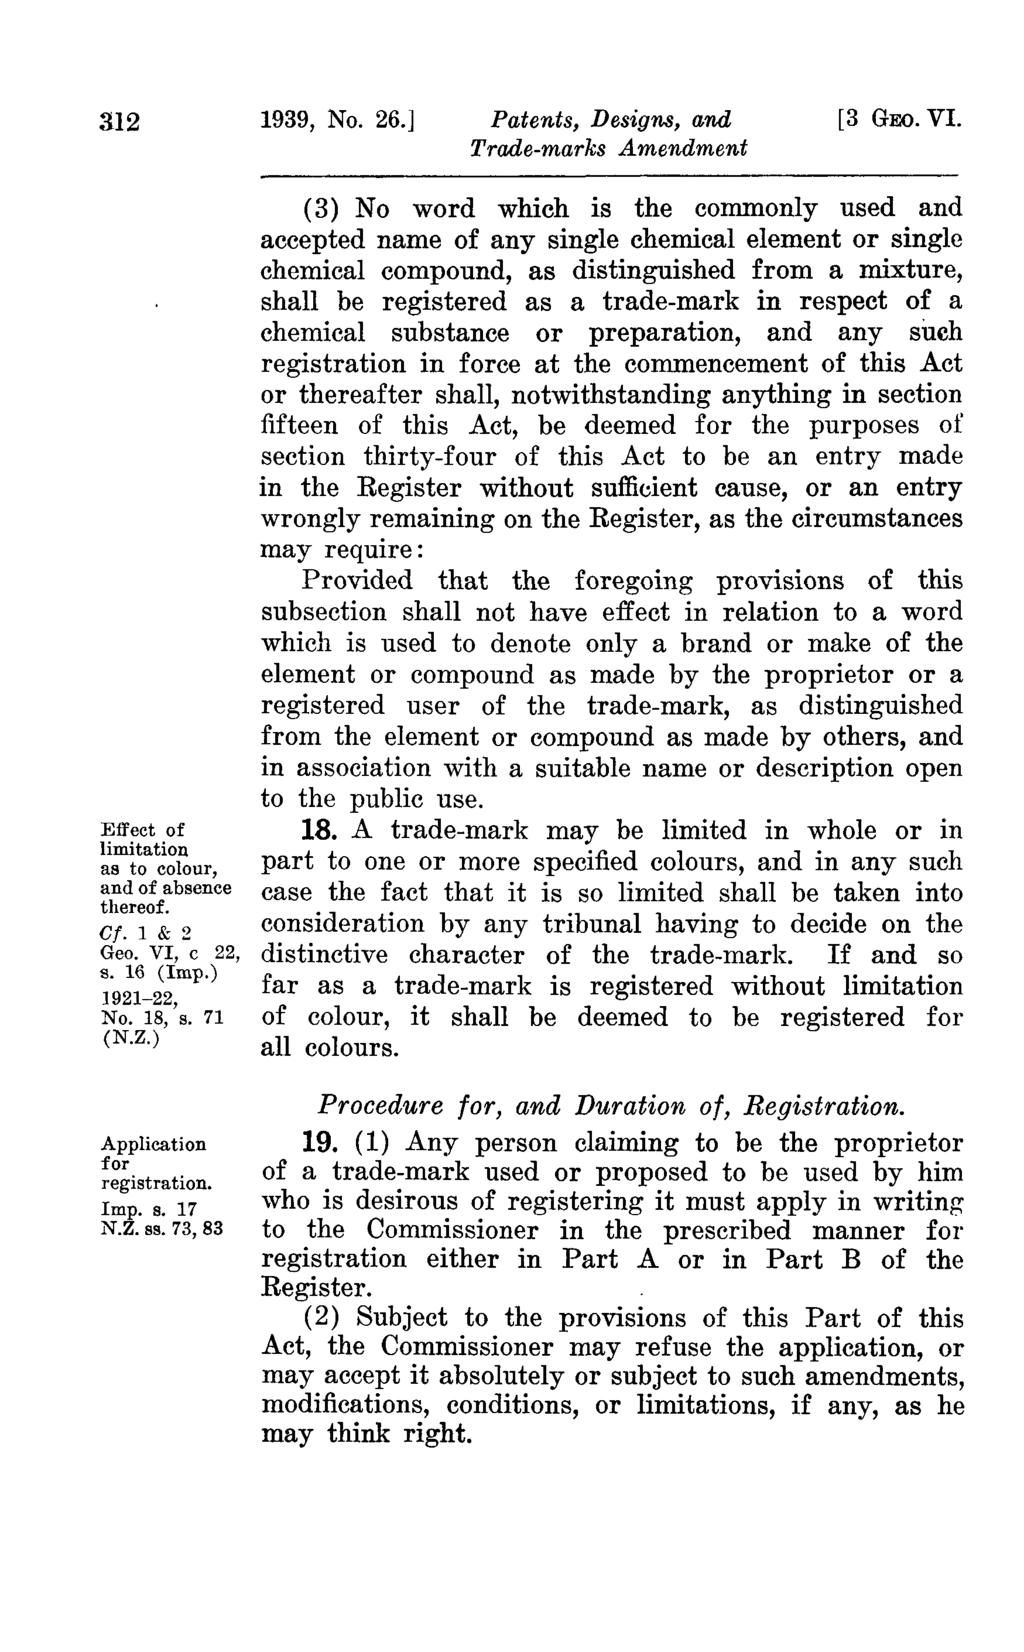 312 1939, No. 26.] Patents, Designs, and Trooe-marks Amendment [3 GEO. VI. Effect of limitation as to colour, and of absence thereof. Cf. 1 & 2 Geo. VI, c 22, s. 16 (Imp.) ]921-22, No. 18, s. 71 (N.Z.